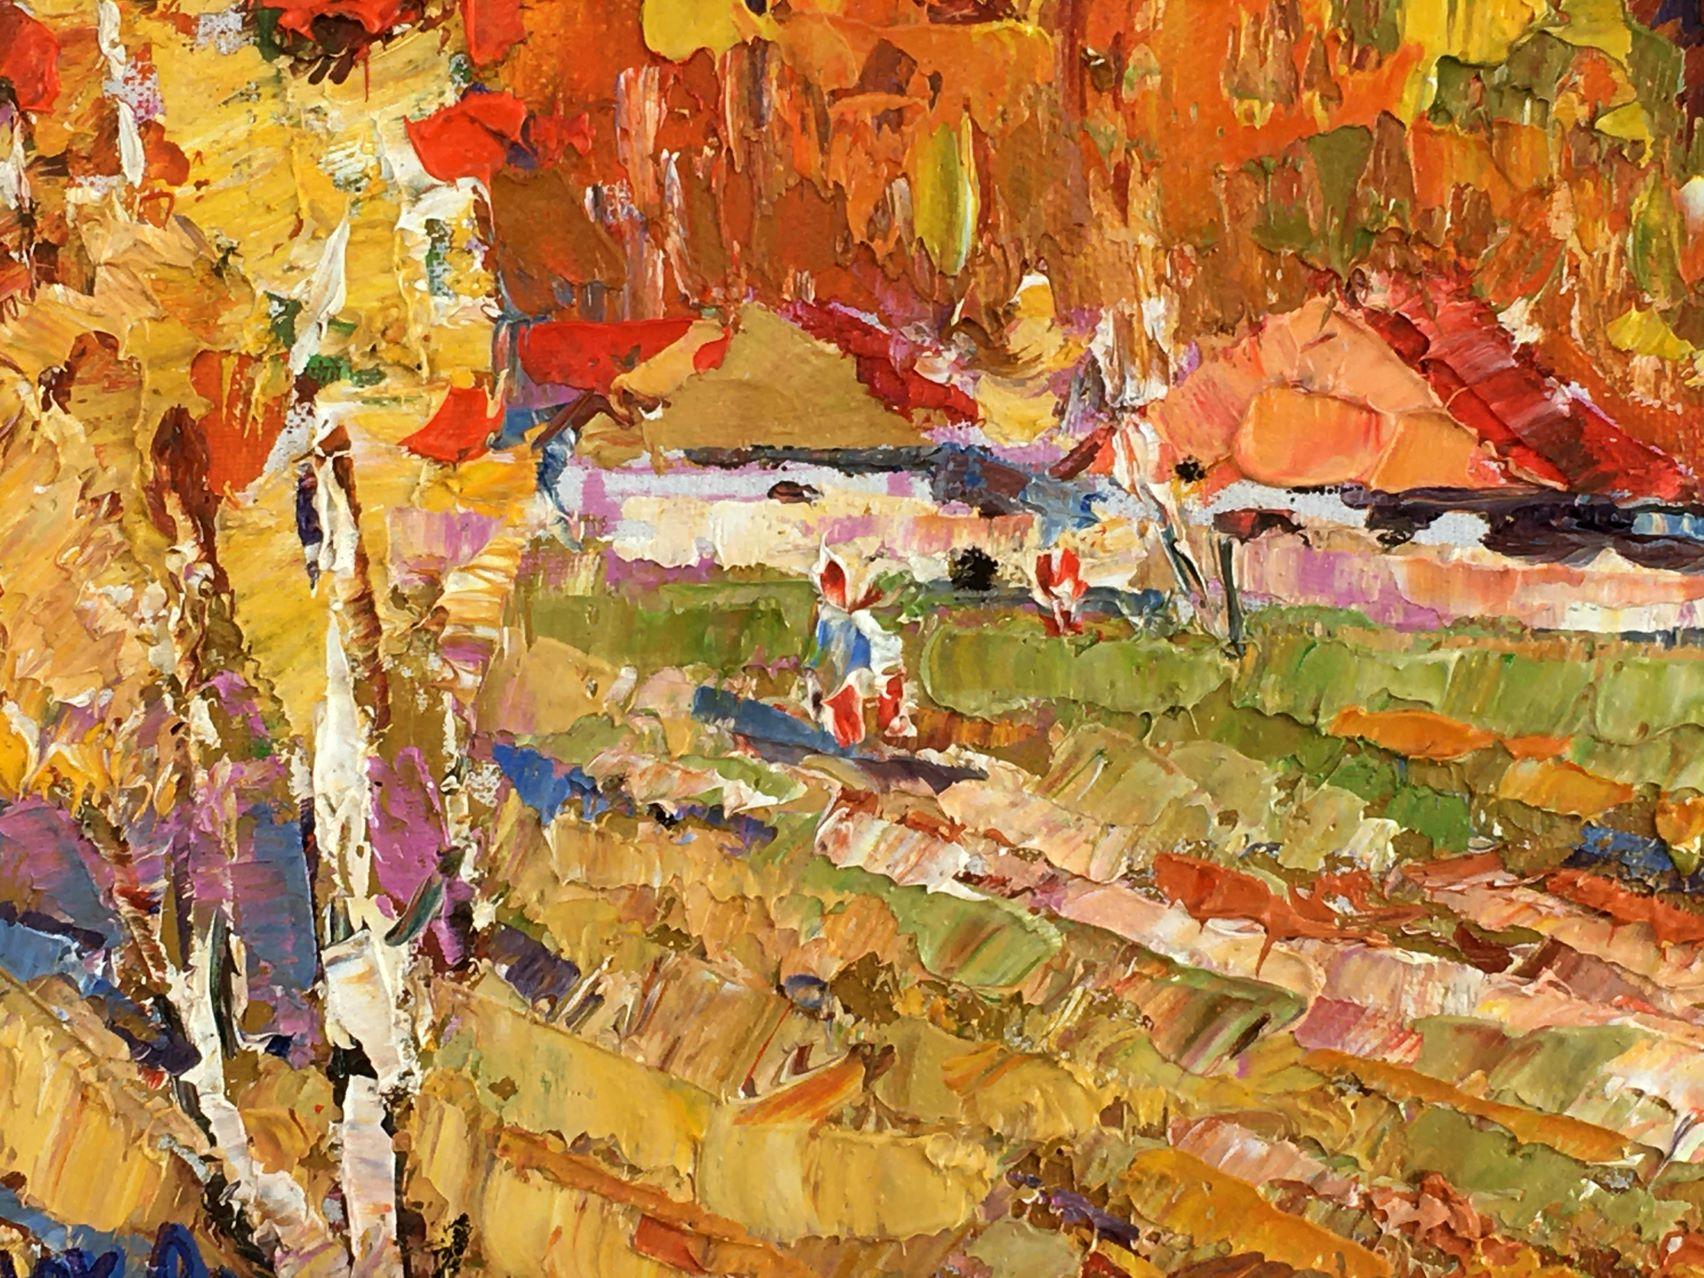 Autumn Day, Impressionism Original oil Painting, Ready to Hang - Brown Landscape Painting by Alex Kalenyuk  